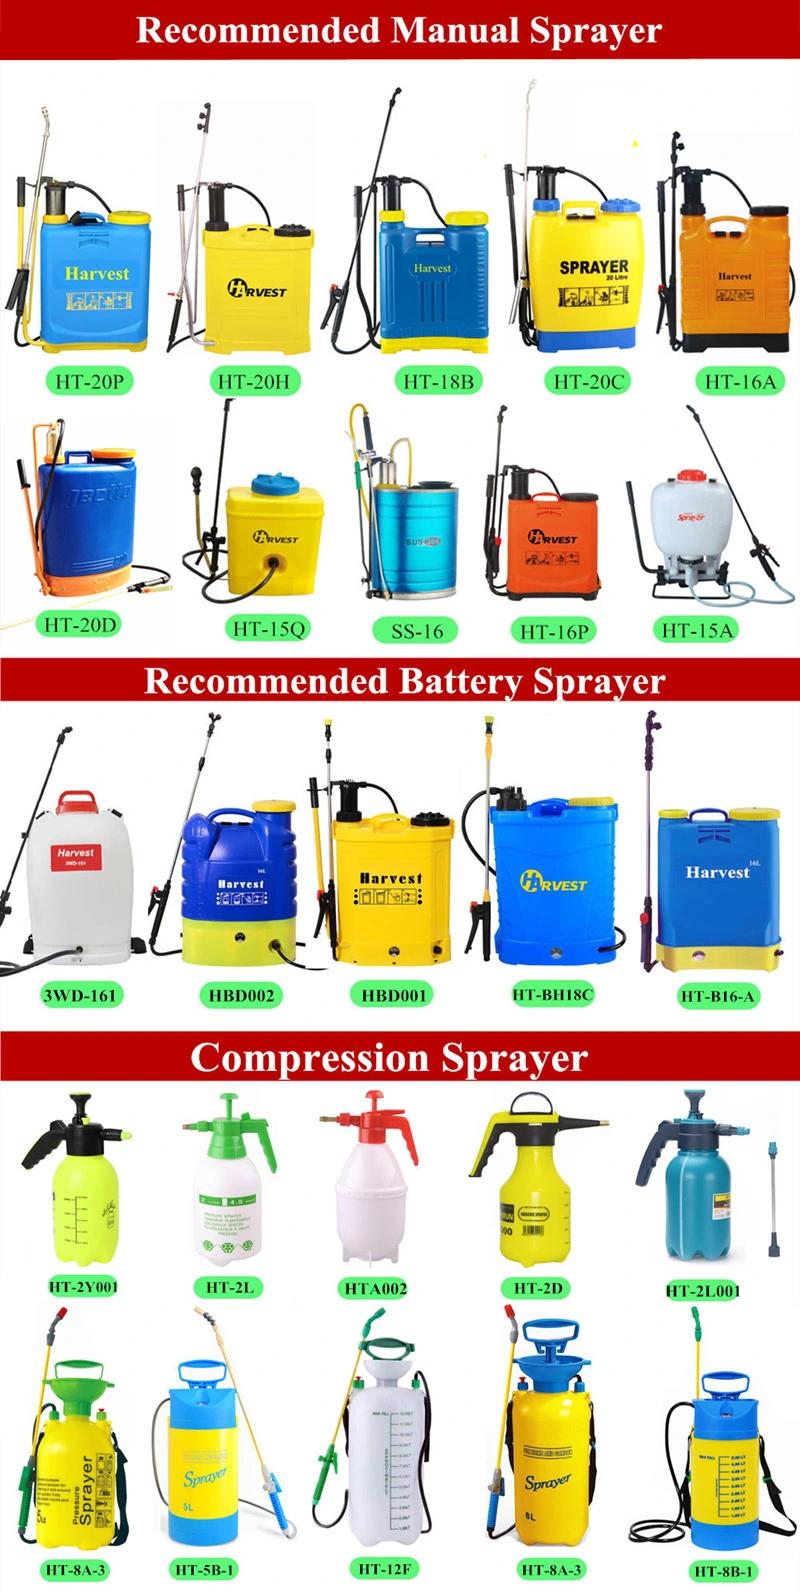 Quality Disinfection Agricultural Farming Knapsack Malaysia Backpack Hand Sprayer (HT-16J)